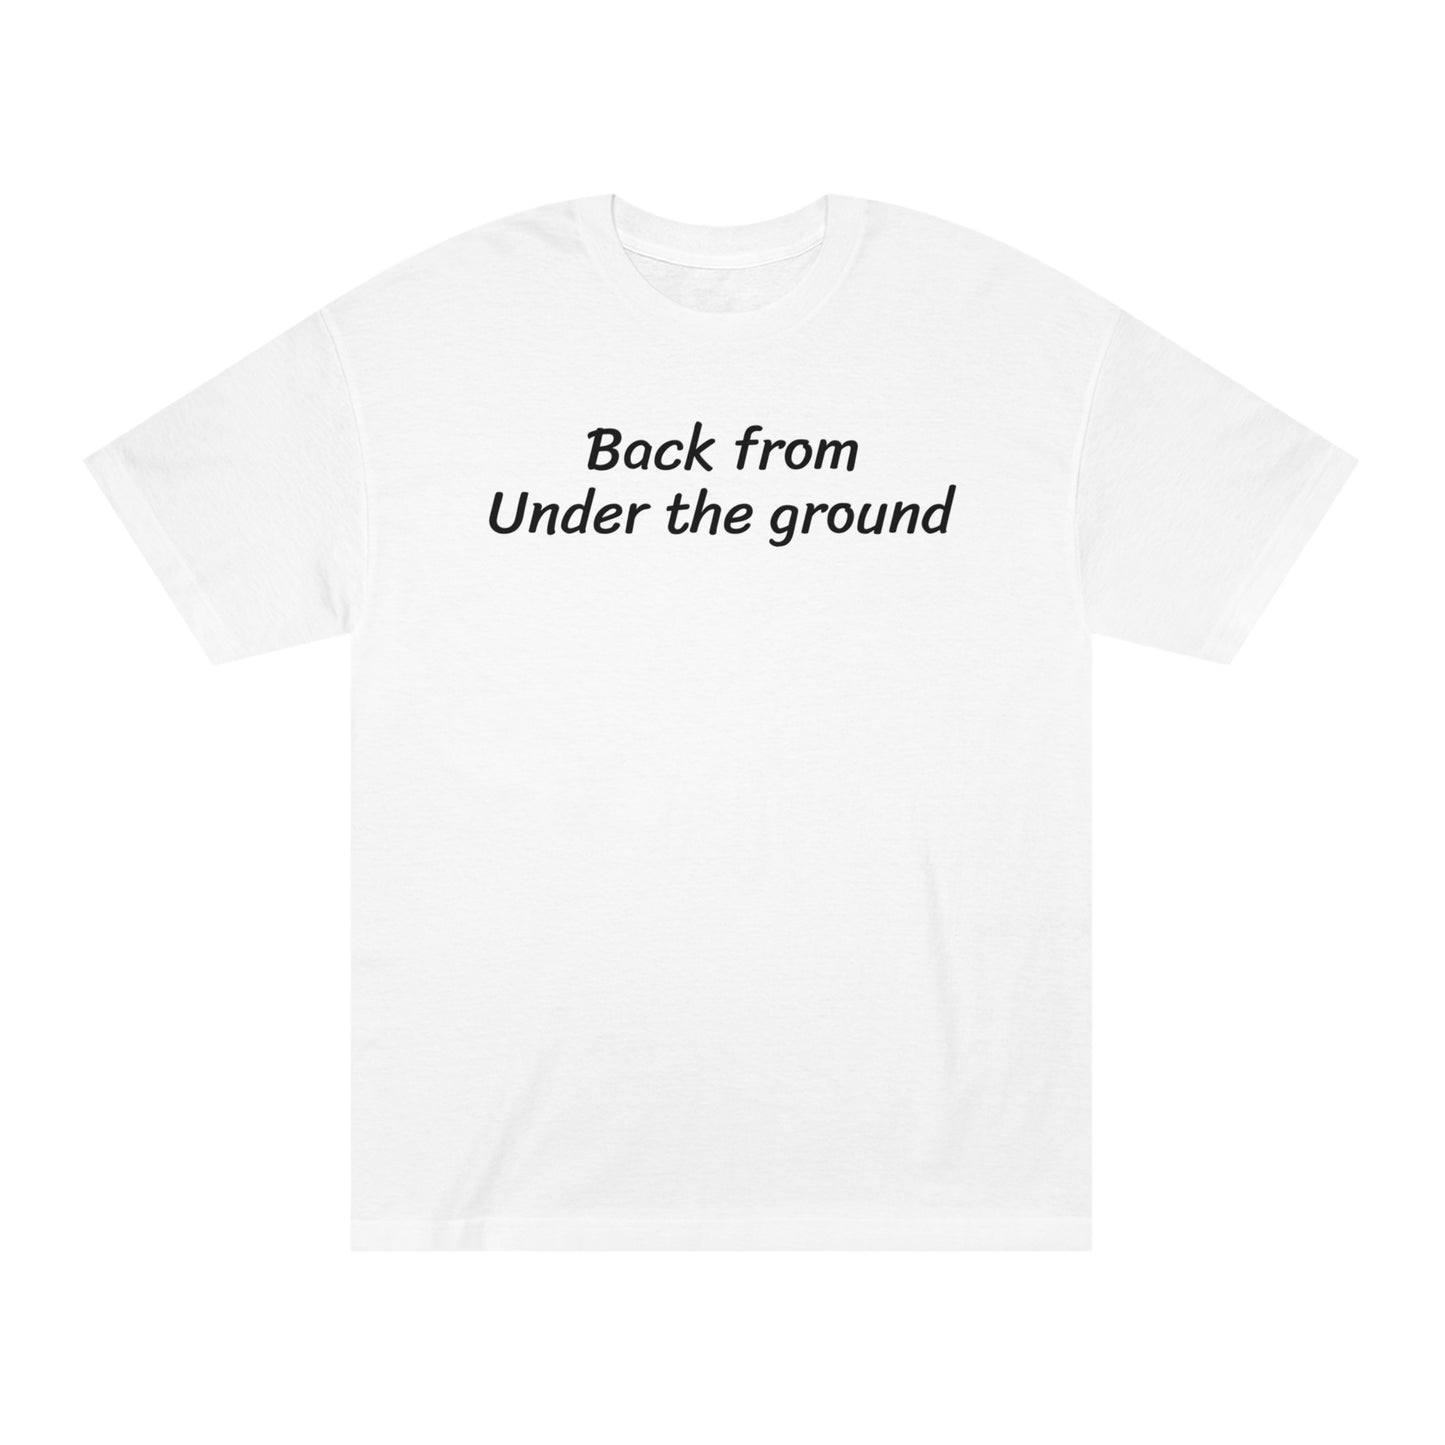 Classic Tee Back from under the ground